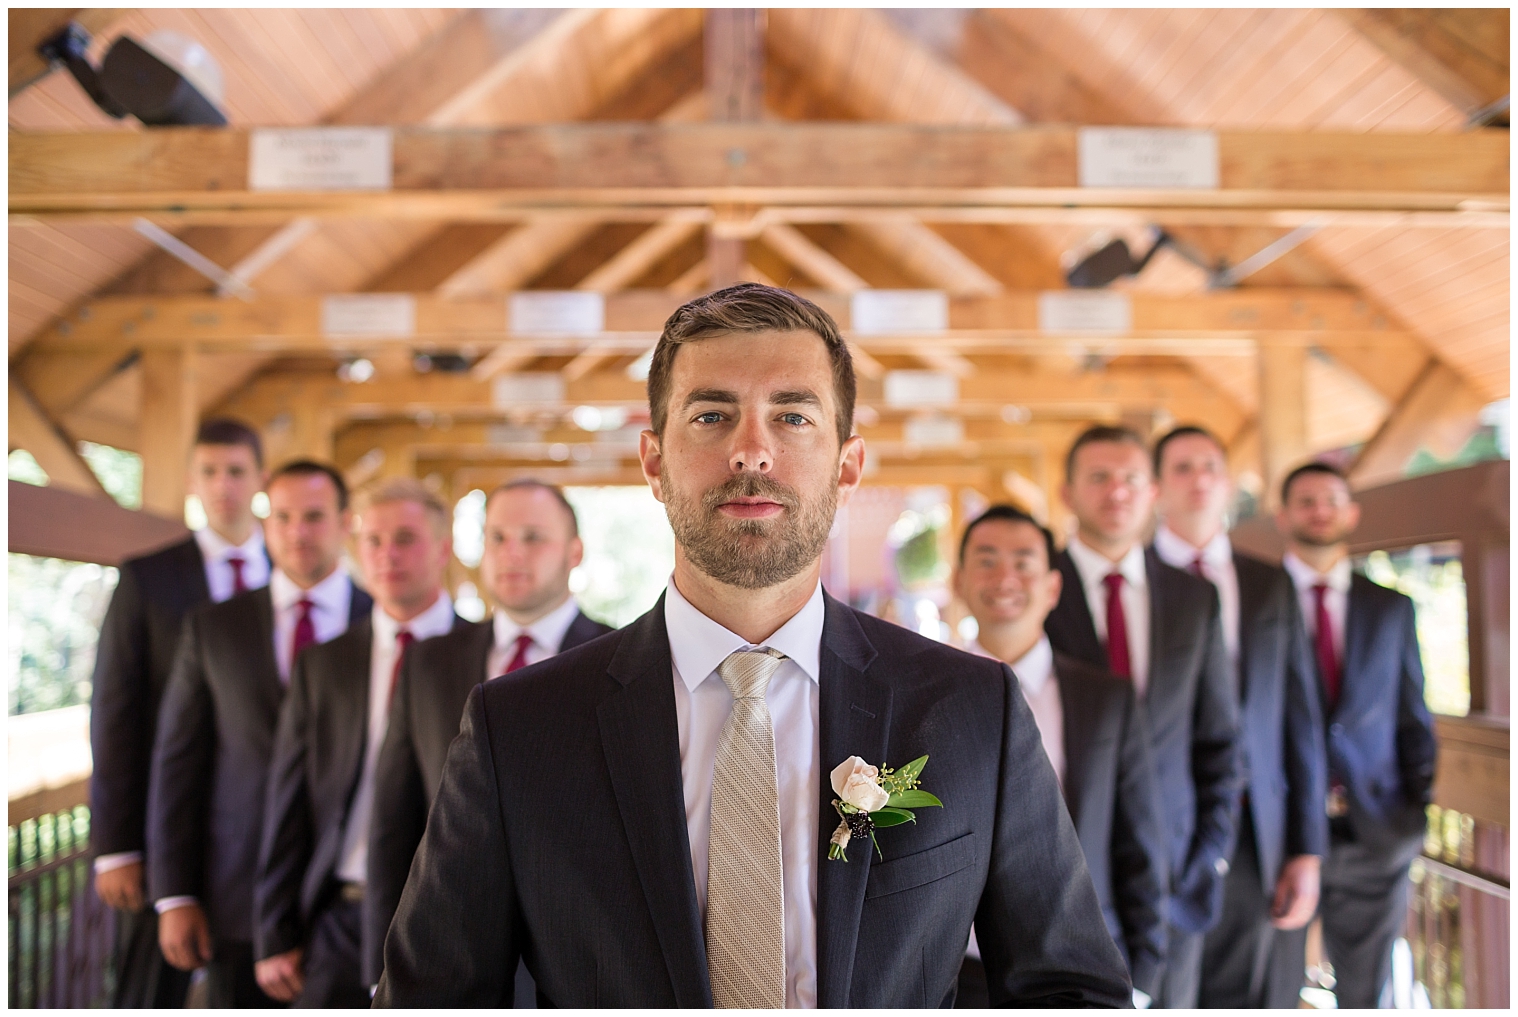 Groom poses with his groomsmen at his Copper Mountain wedding.